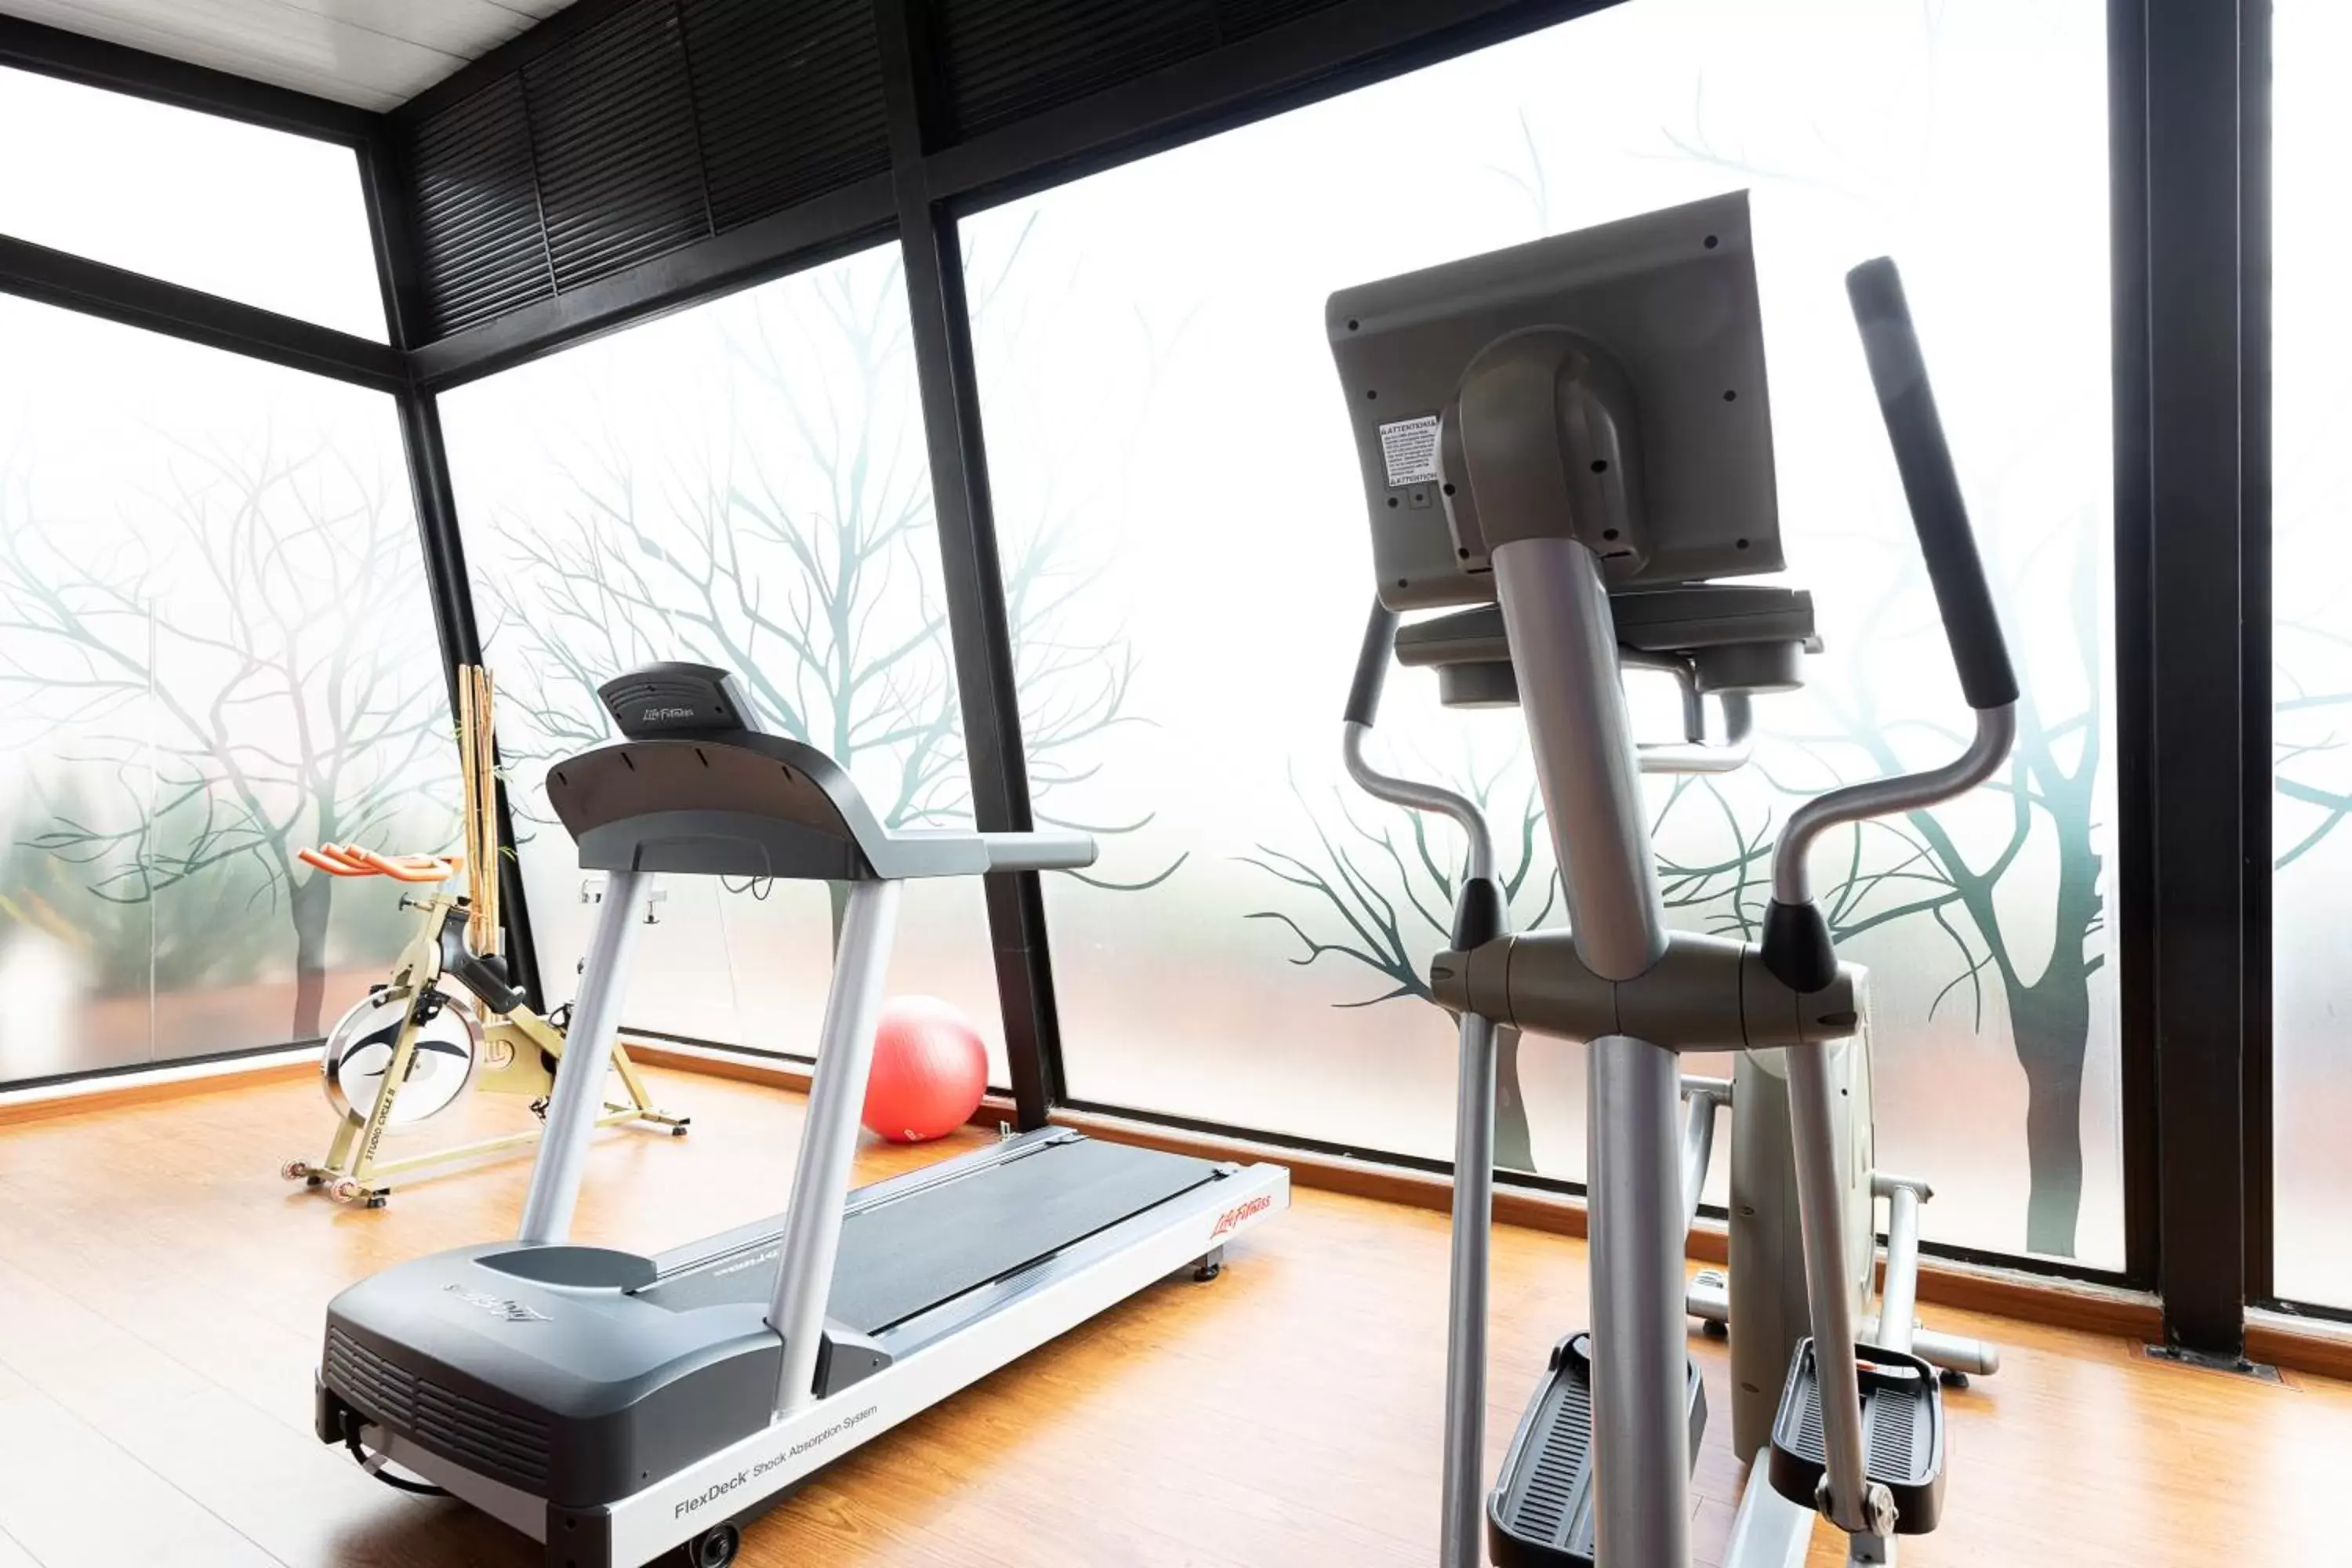 Fitness centre/facilities, Fitness Center/Facilities in Hotel bh Parque 93